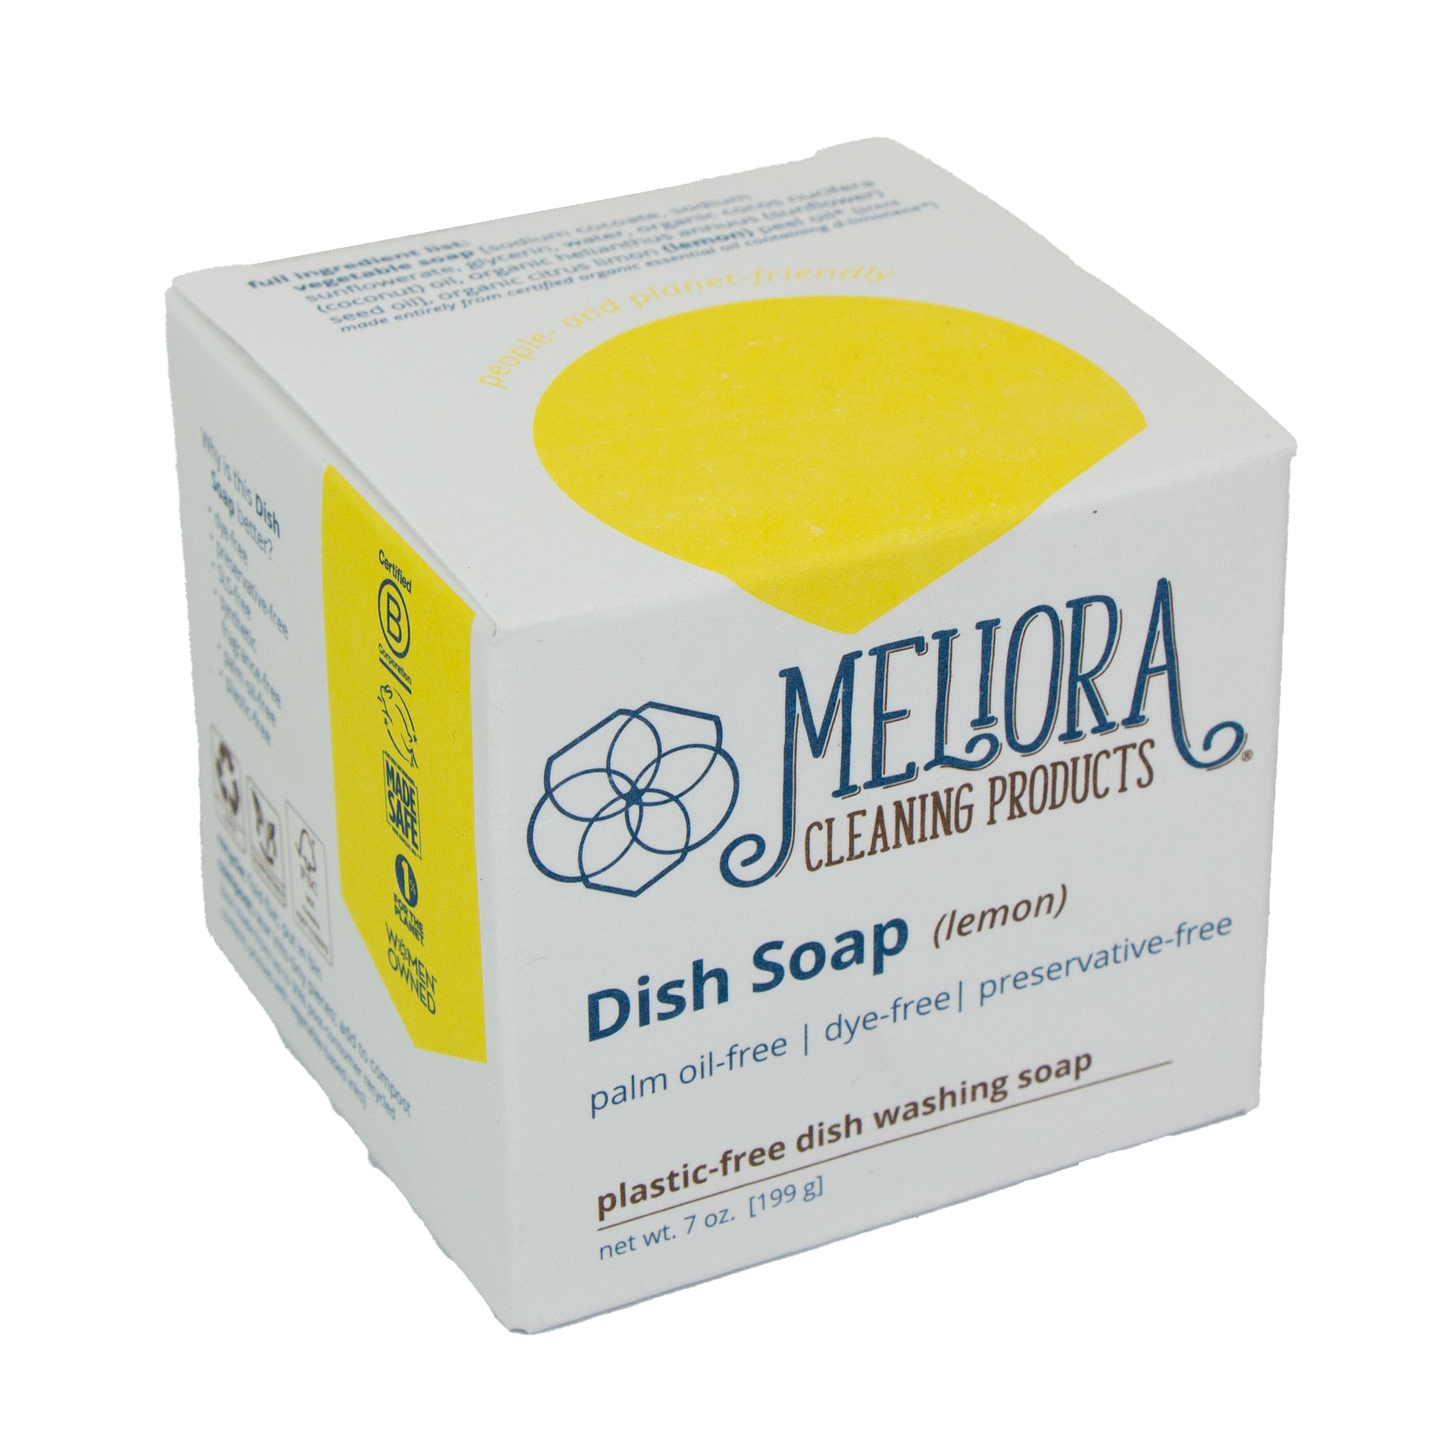 Meliora Cleaning Products - Lemon Dish Soap